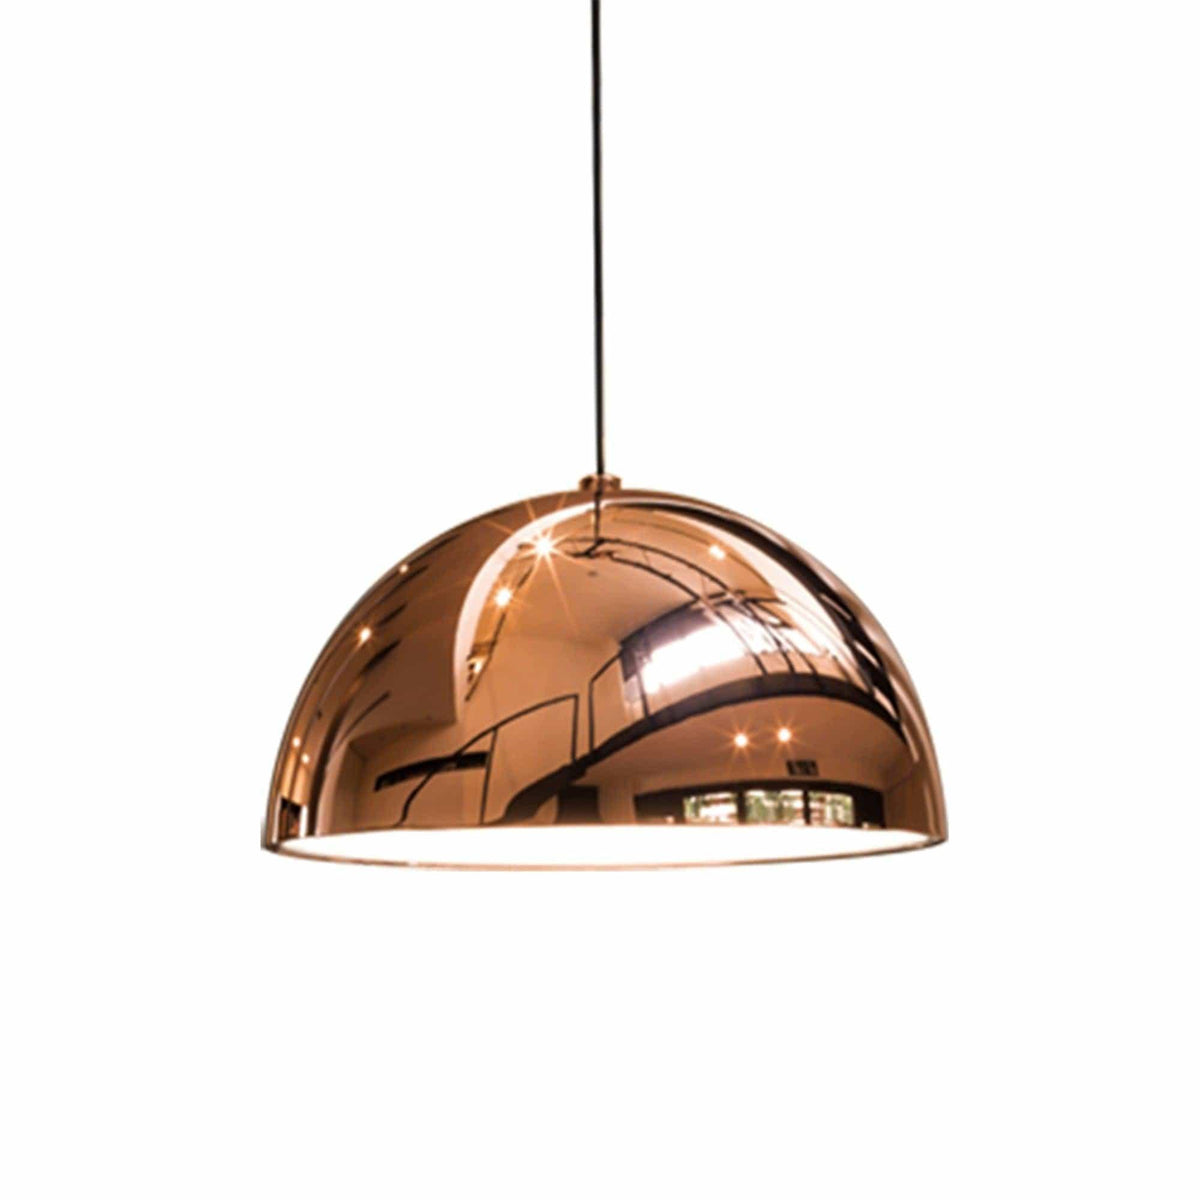 Seed Design - Dome Pendant Light - SQ-360MP-CPR | Montreal Lighting & Hardware